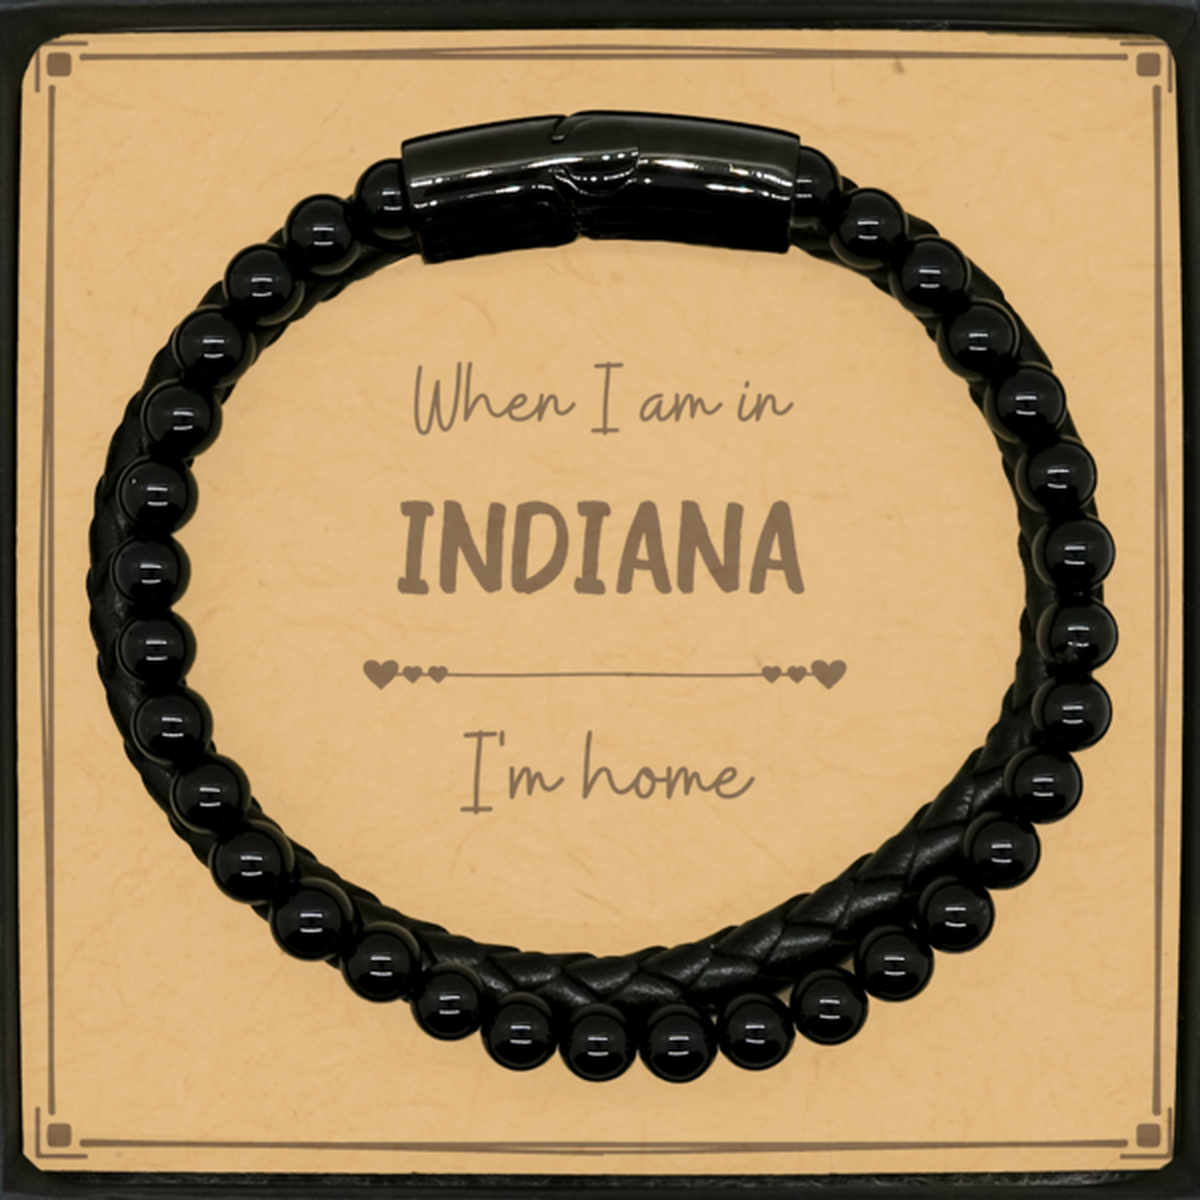 When I am in Indiana I'm home Stone Leather Bracelets, Message Card Gifts For Indiana, State Indiana Birthday Gifts for Friends Coworker